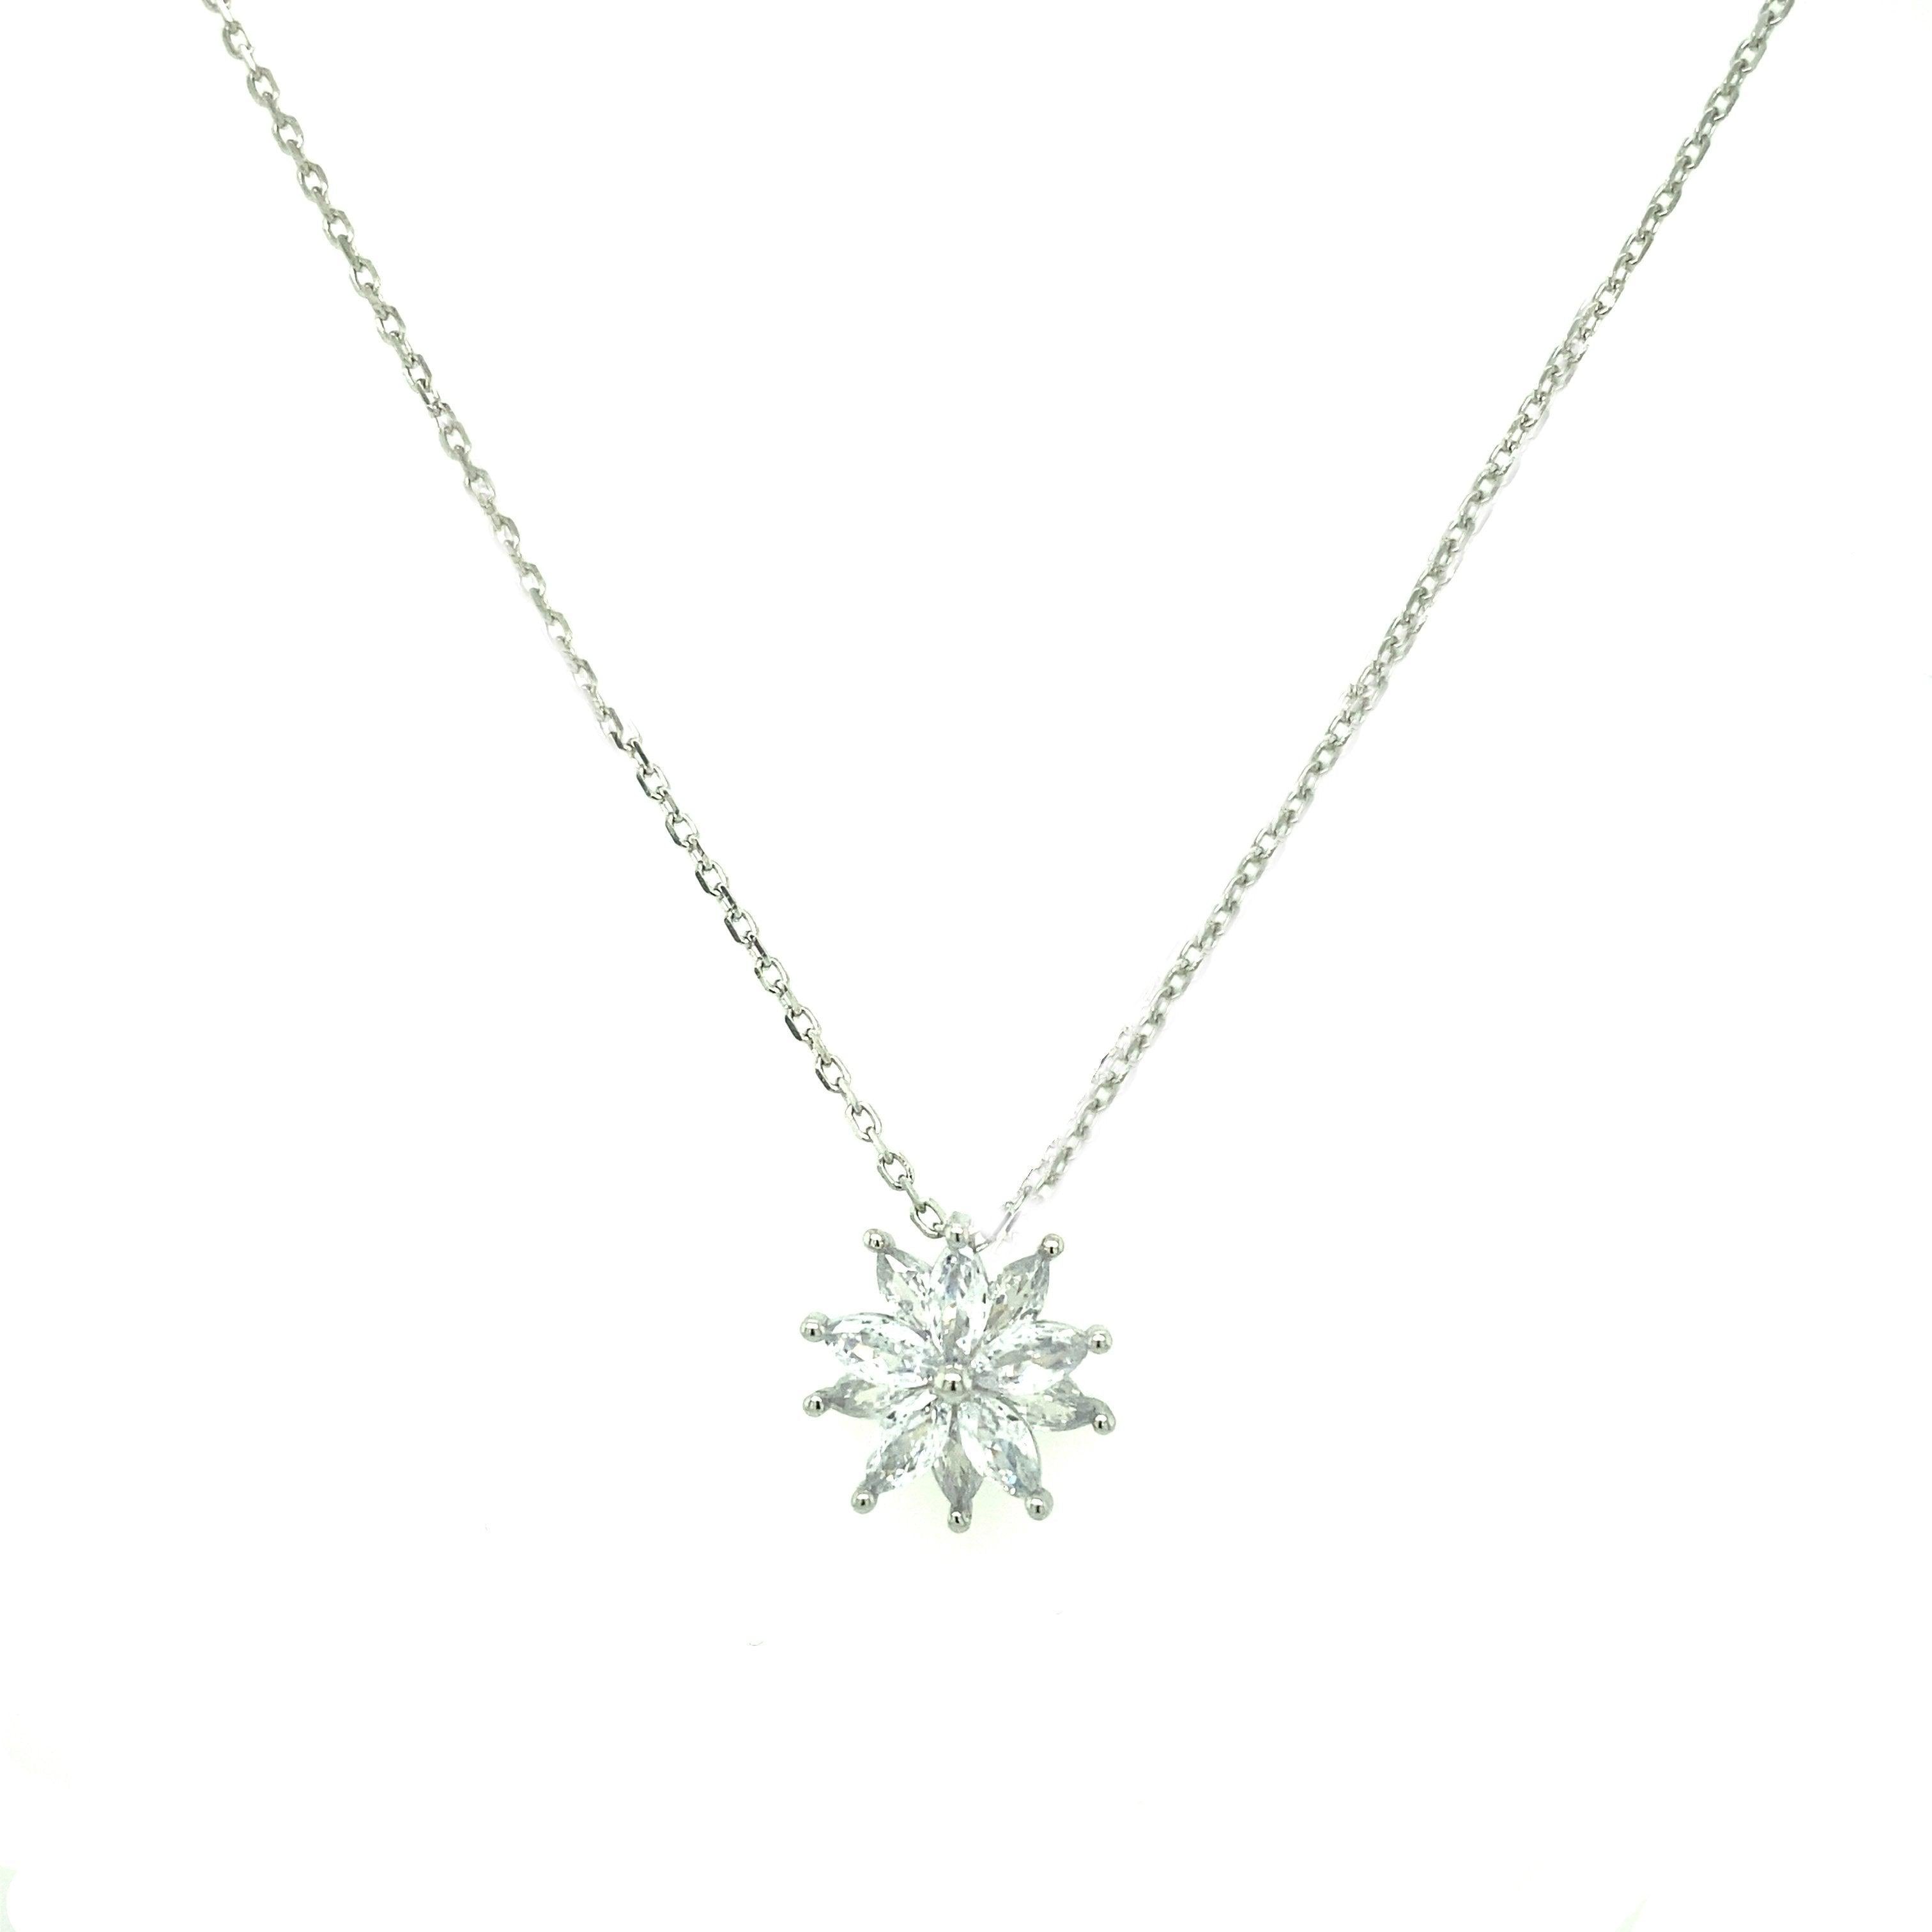 Asfour-Crystal-Silver-accessoriesNecklace-N1726-925-Sterling-Silver